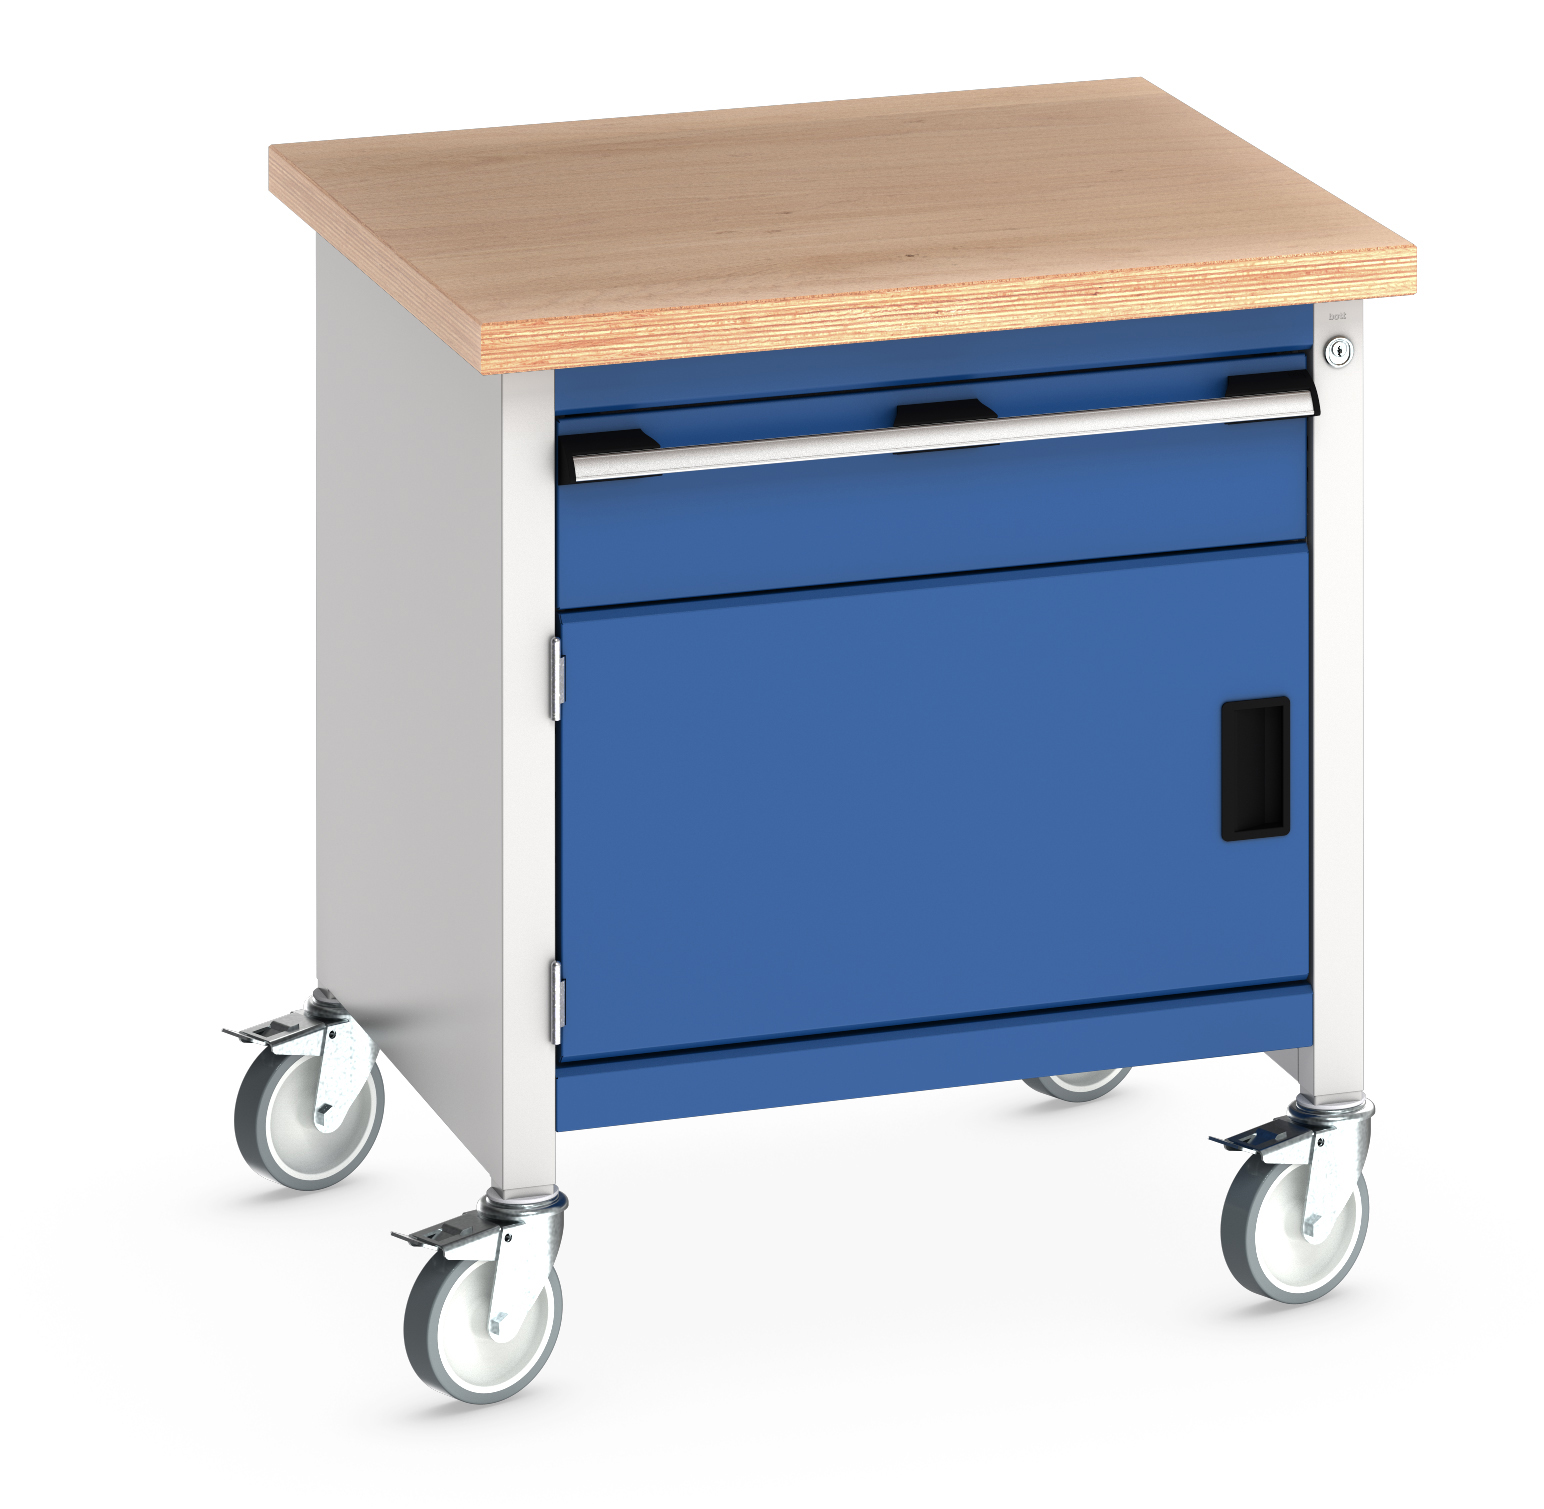 Bott Cubio Mobile Storage Bench With 1 Drawer - Full Cupboard - 41002088.11V